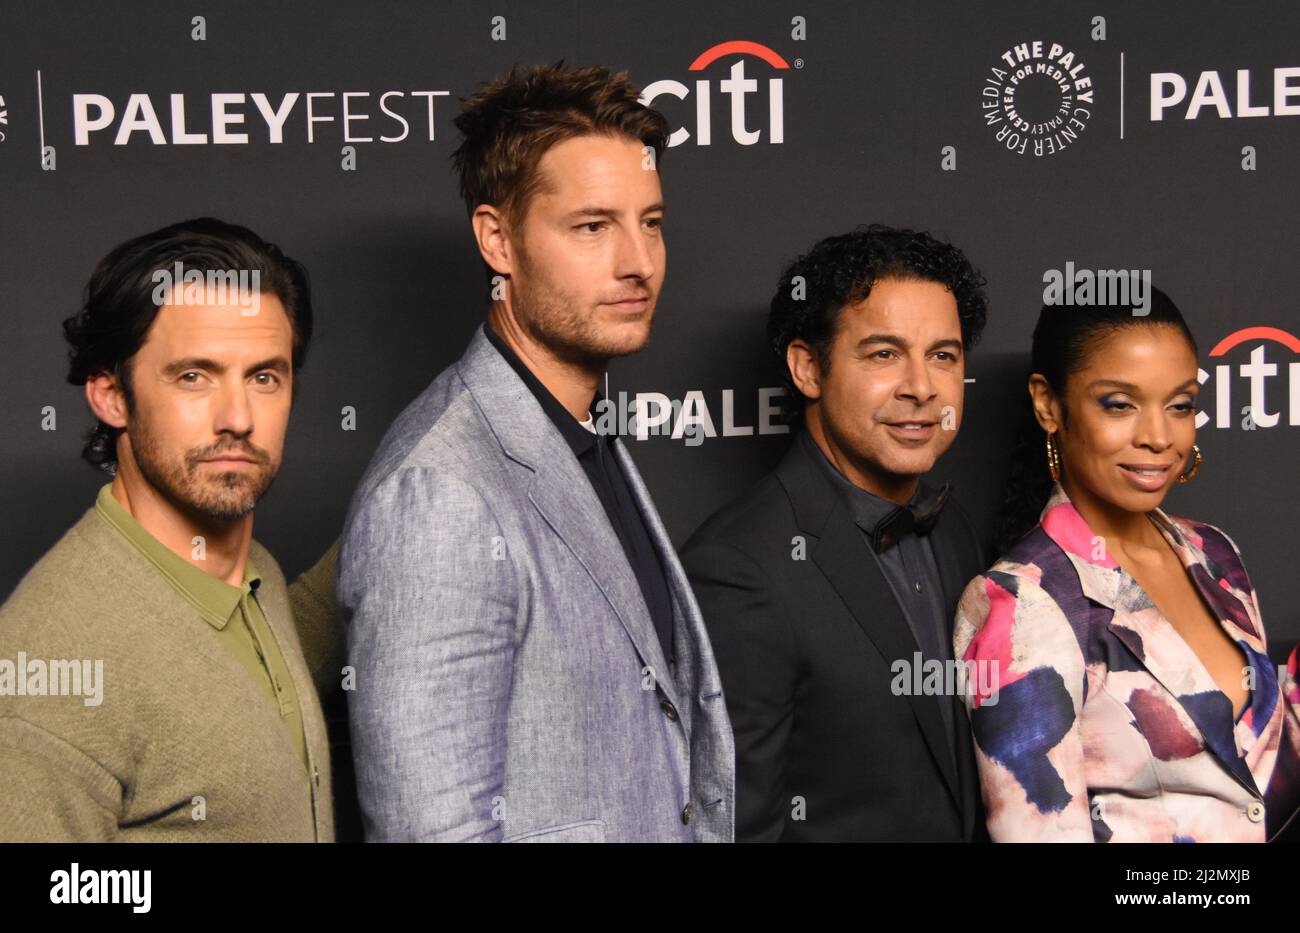 Hollywood, California, USA 2nd April 2022 (L-R) Actor Milo Ventimiglia, Actor Justin Hartley, Actor Jon Huertas and Actress Susan Kelechi Watson attend The Paley Center For Media's 39th Annual Paleyfest 'This Is Us' at Dolby Theatre on April 2, 2022 in Hollywood, California, USA. Photo by Barry King/Alamy Live News Stock Photo